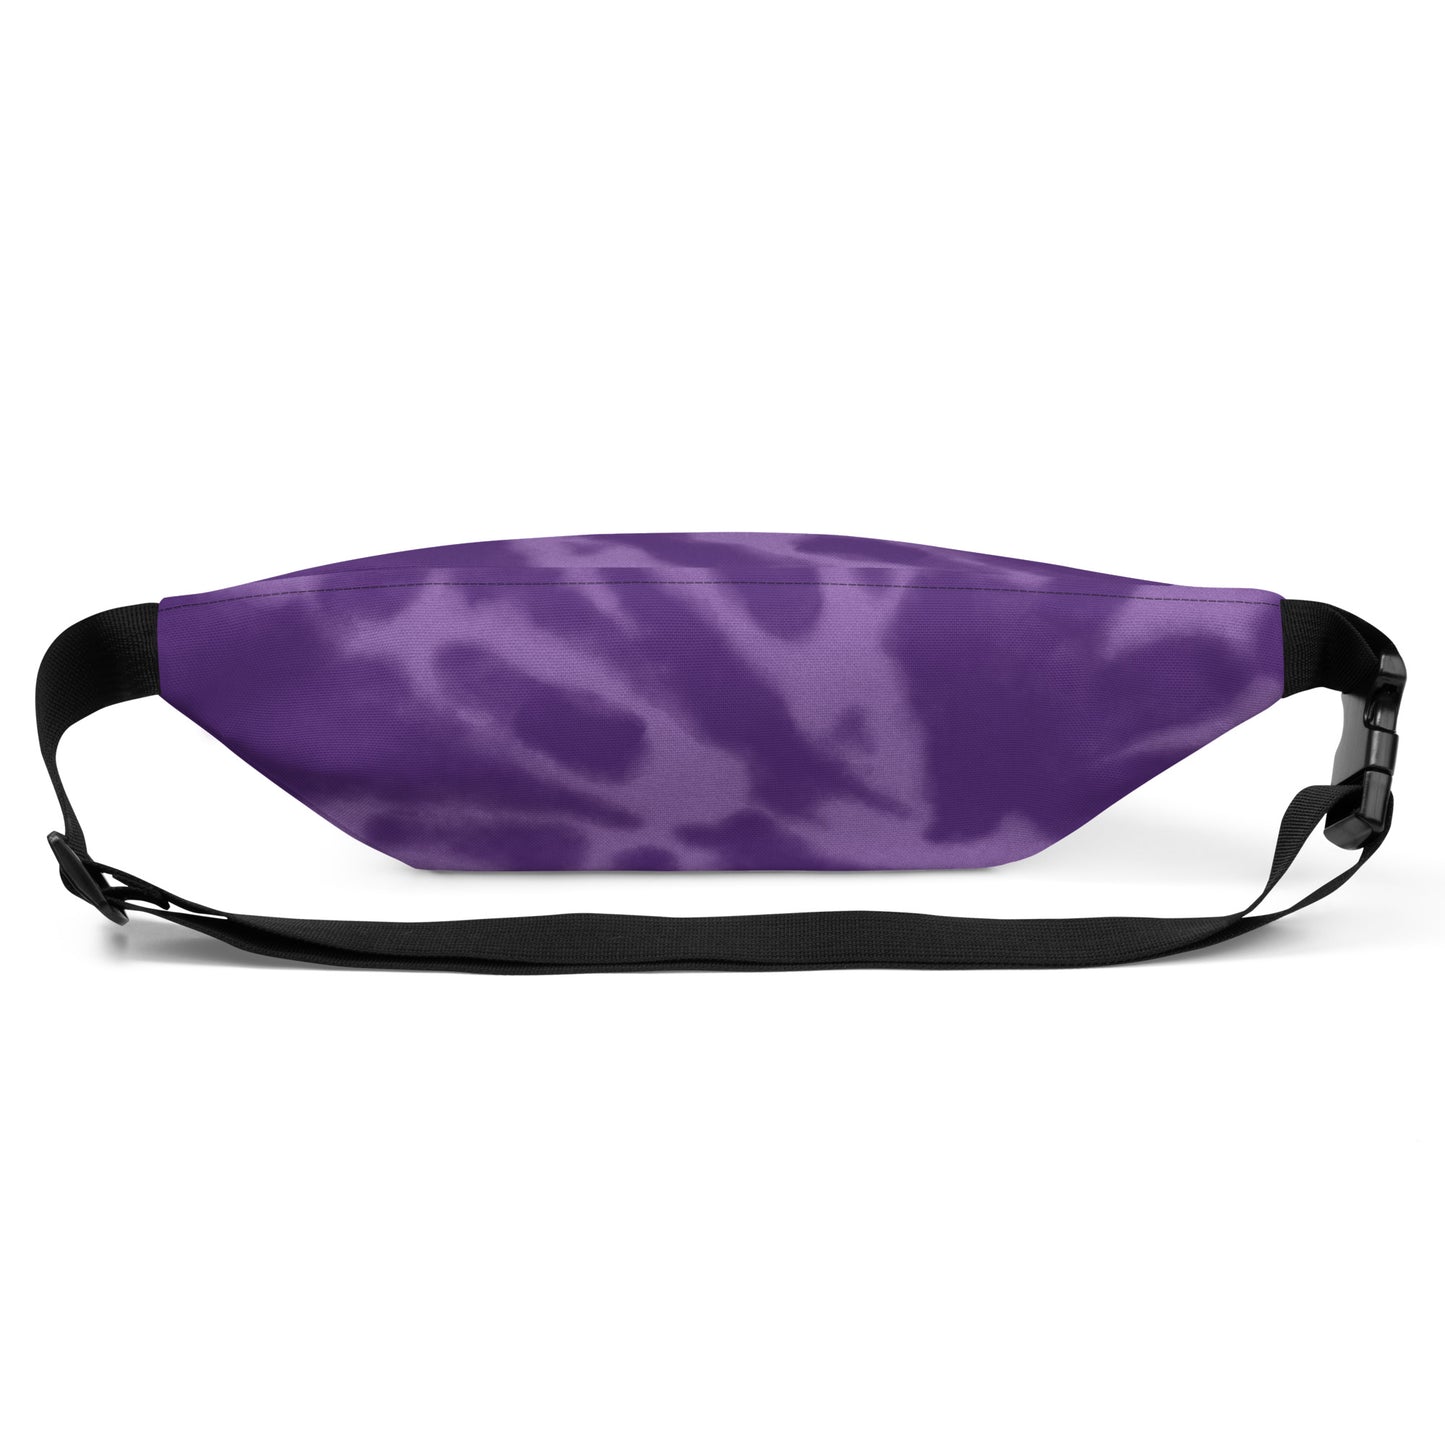 Travel Gift Fanny Pack - Purple Tie-Dye • MSY New Orleans • YHM Designs - Image 09